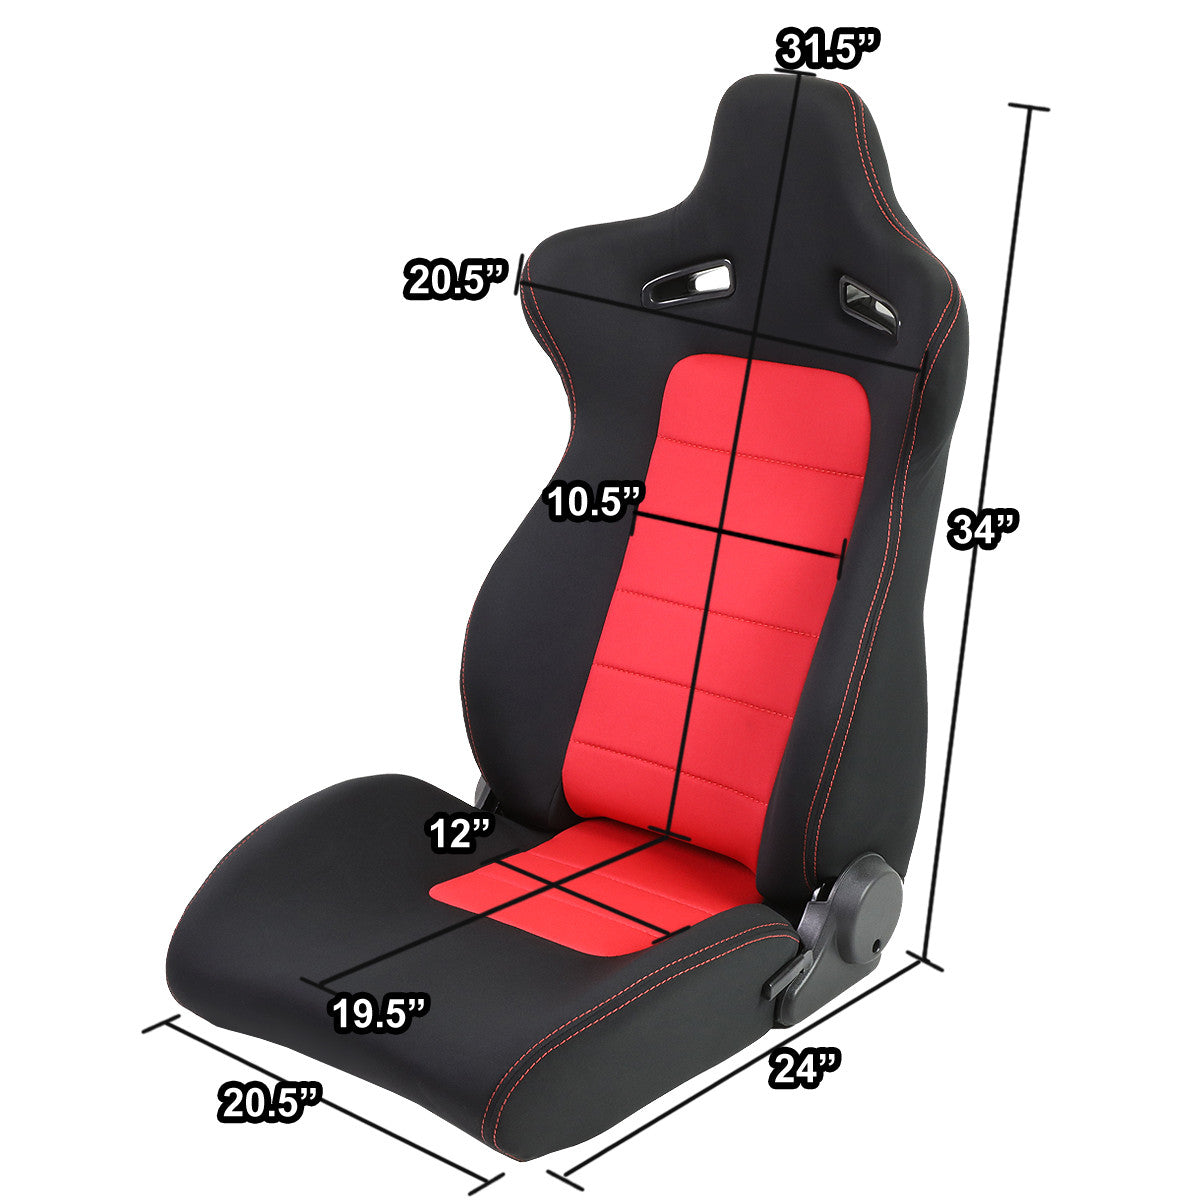 Left / Driver Side Reclinable Woven Fabric Racing Seat w/Slider - XL10